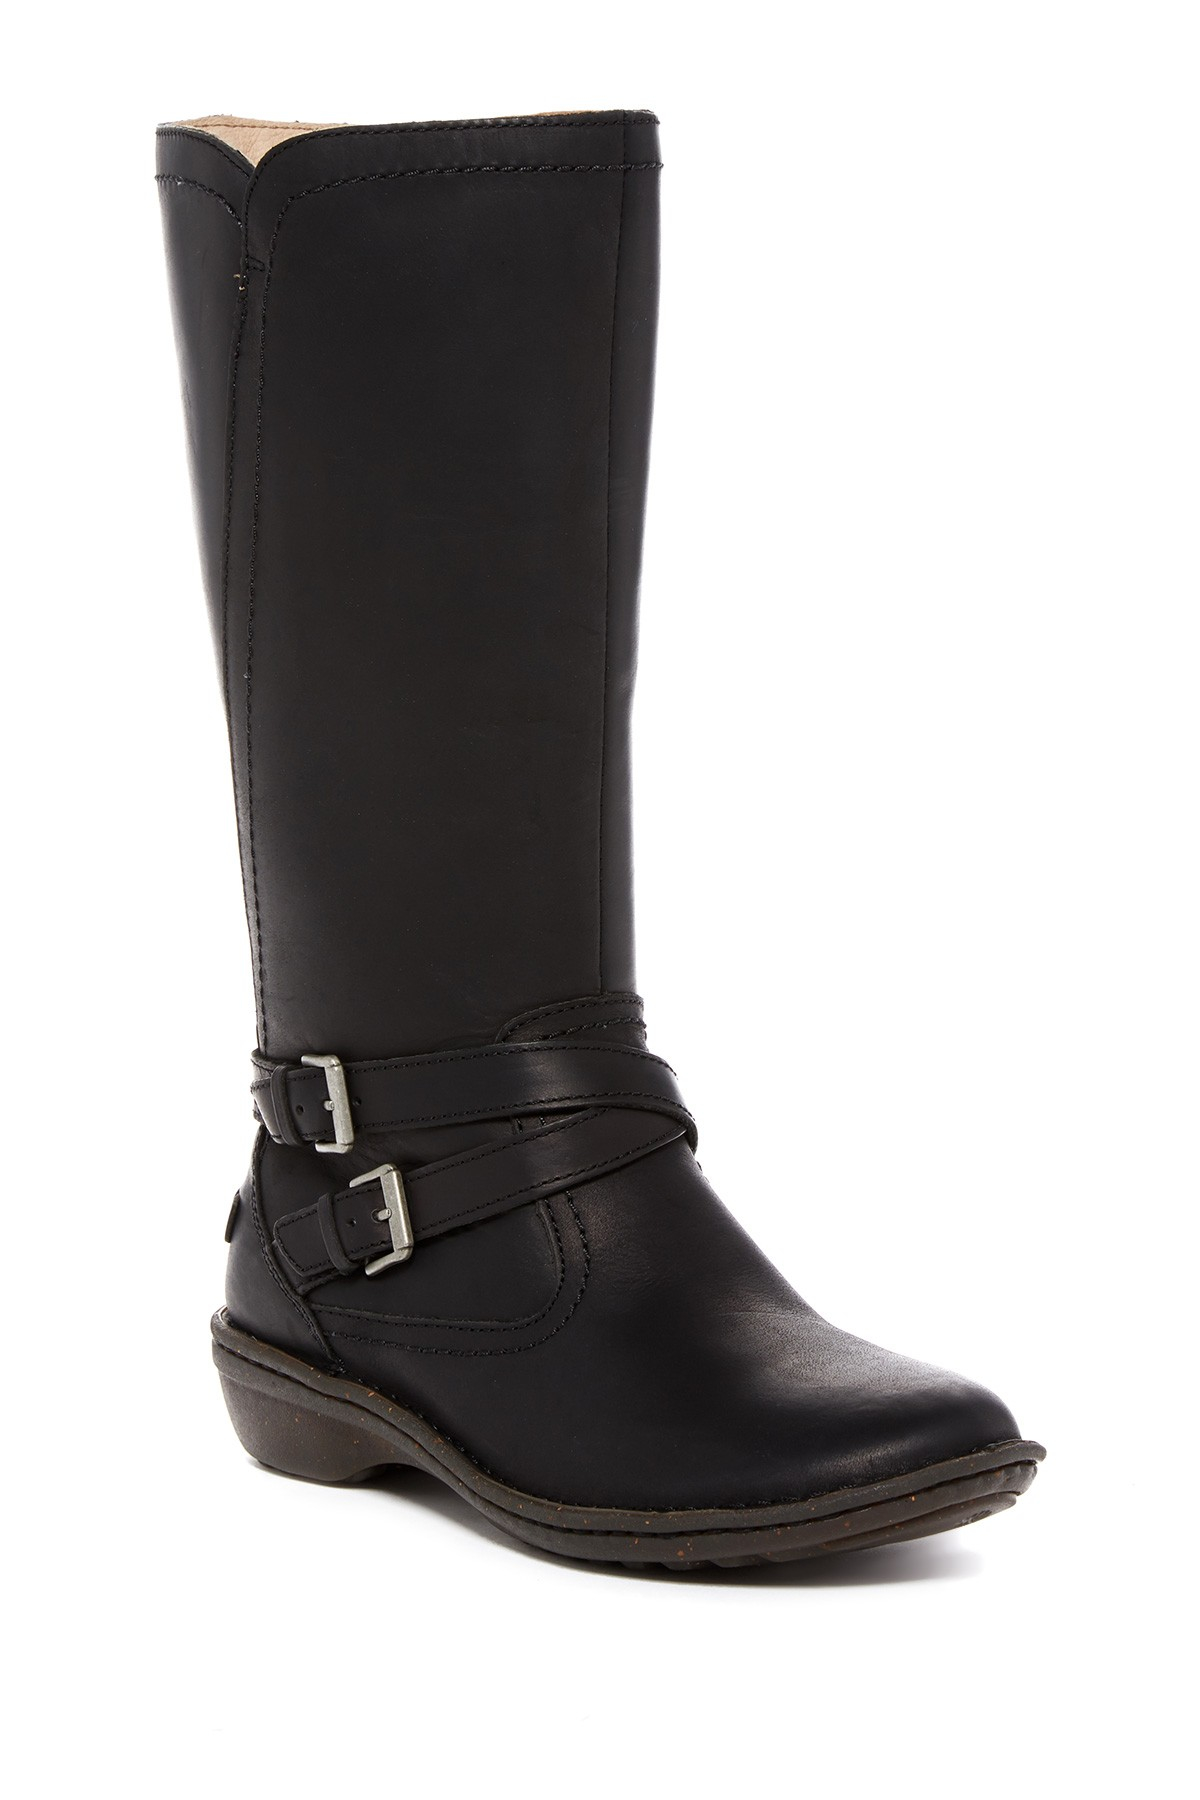 Lyst - UGG Rosen Tall Buckle Uggpure(tm) Lined Boot in Black